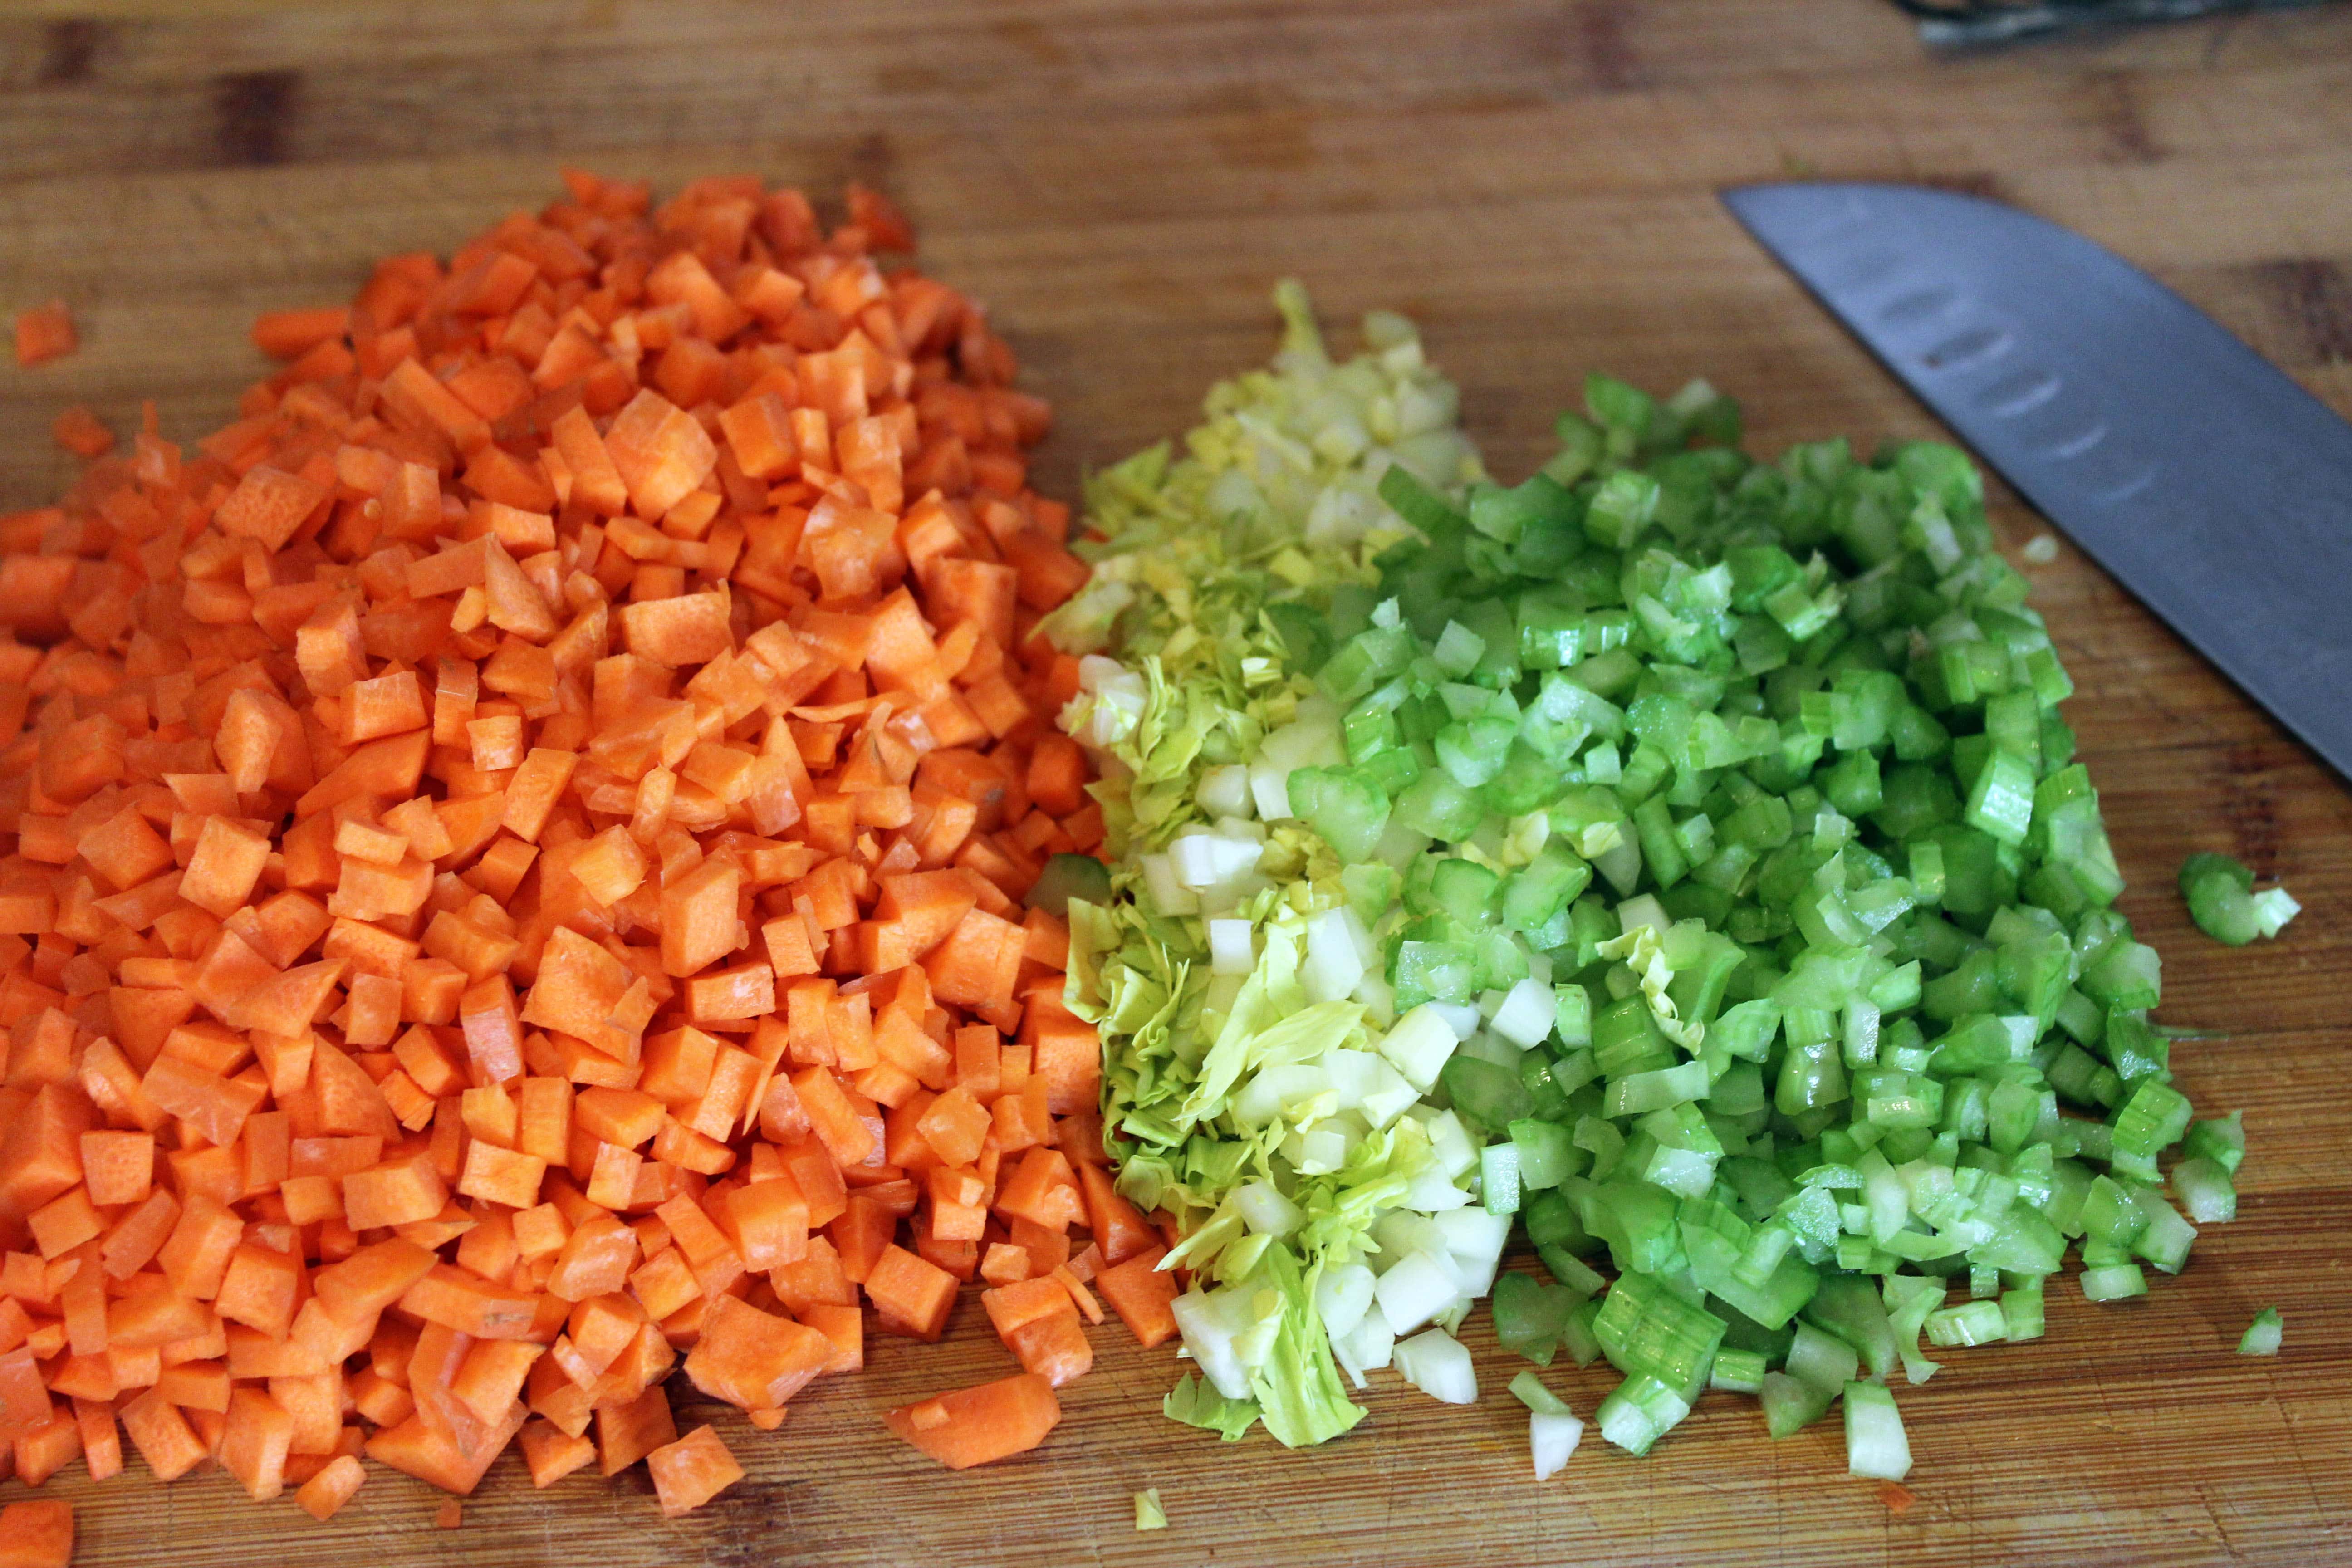 Chopped celery and carrot